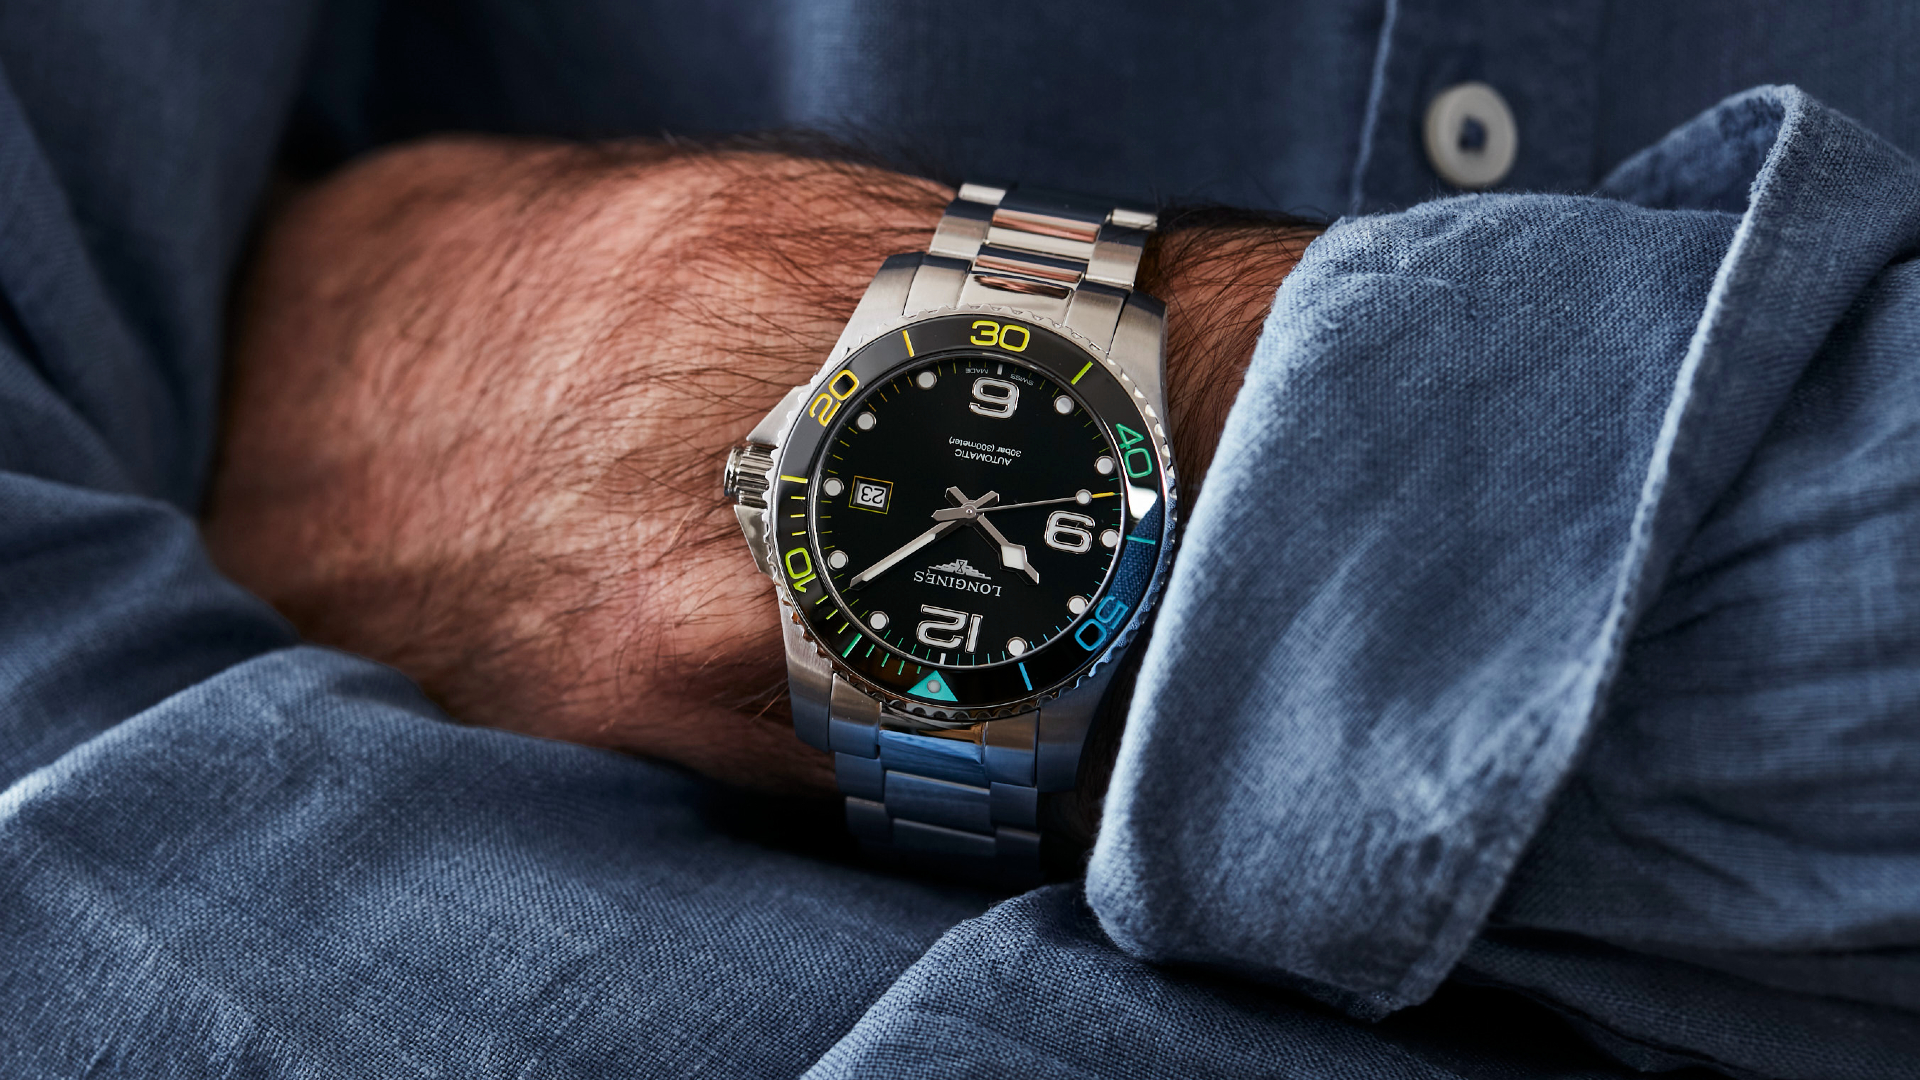 The Longines HydroConquest XXII Commonwealth Games Watch Is Ready To Race